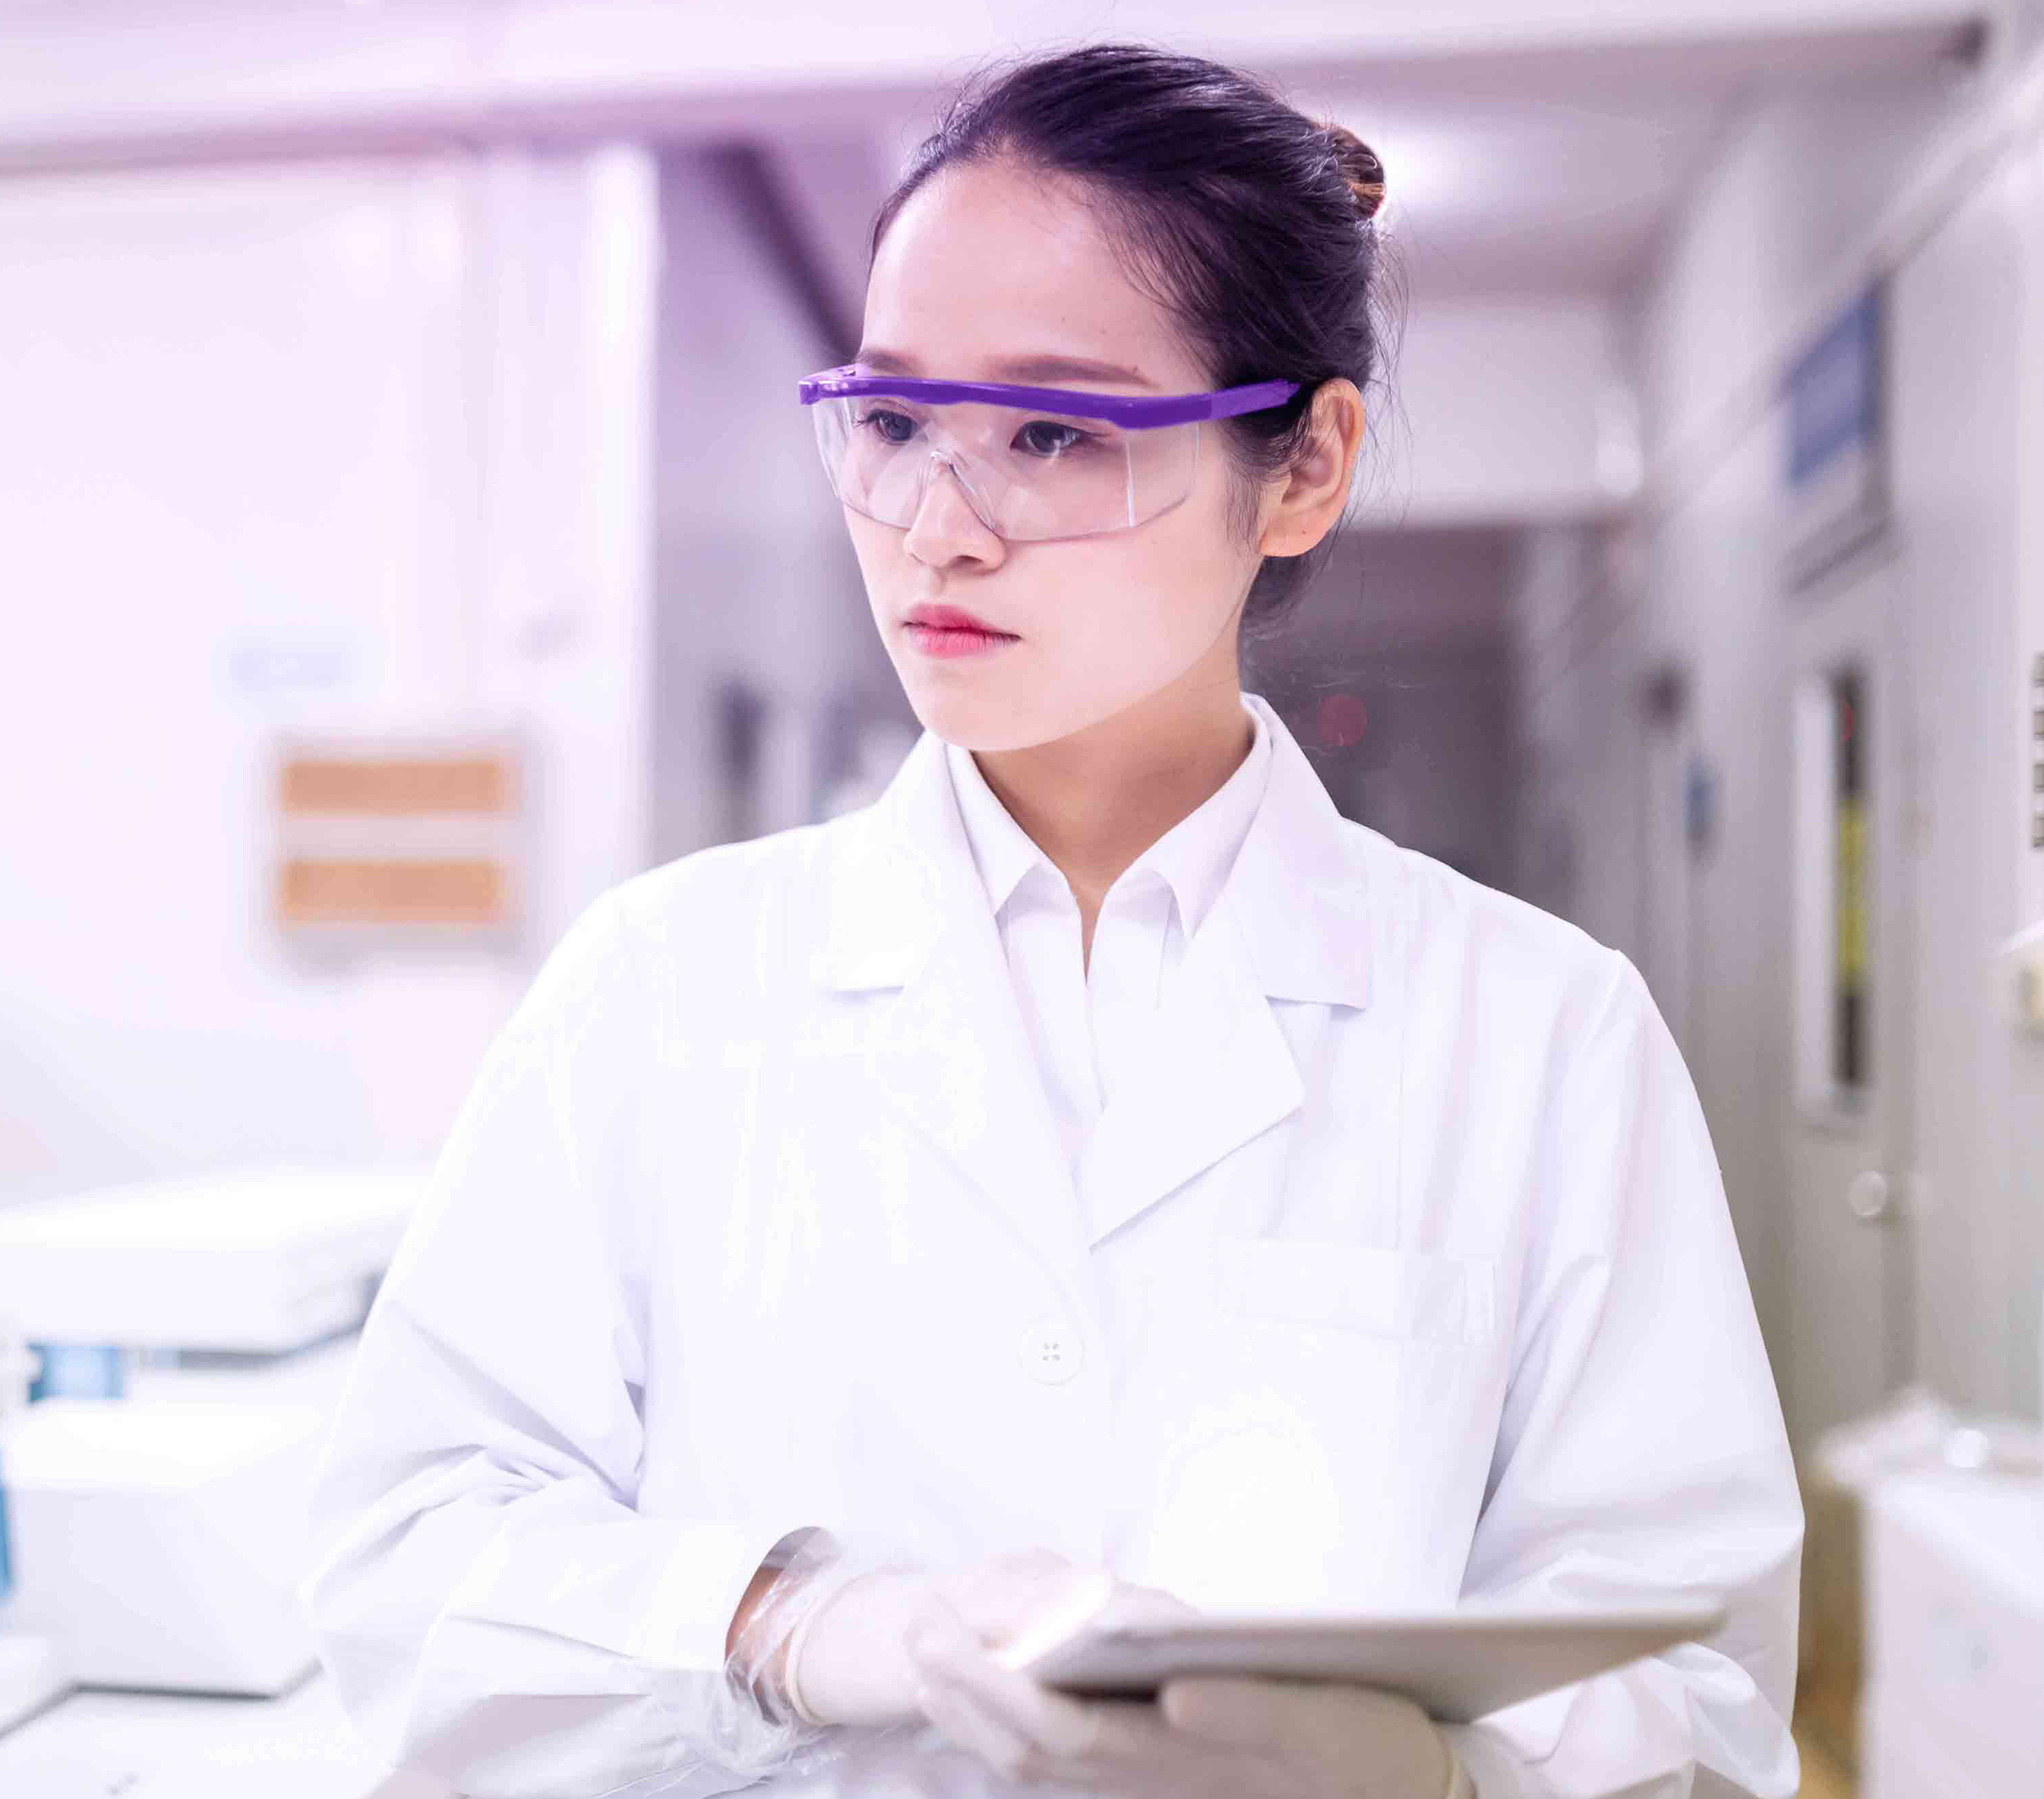 Woman in a lab wearing protective equipment and holding papers